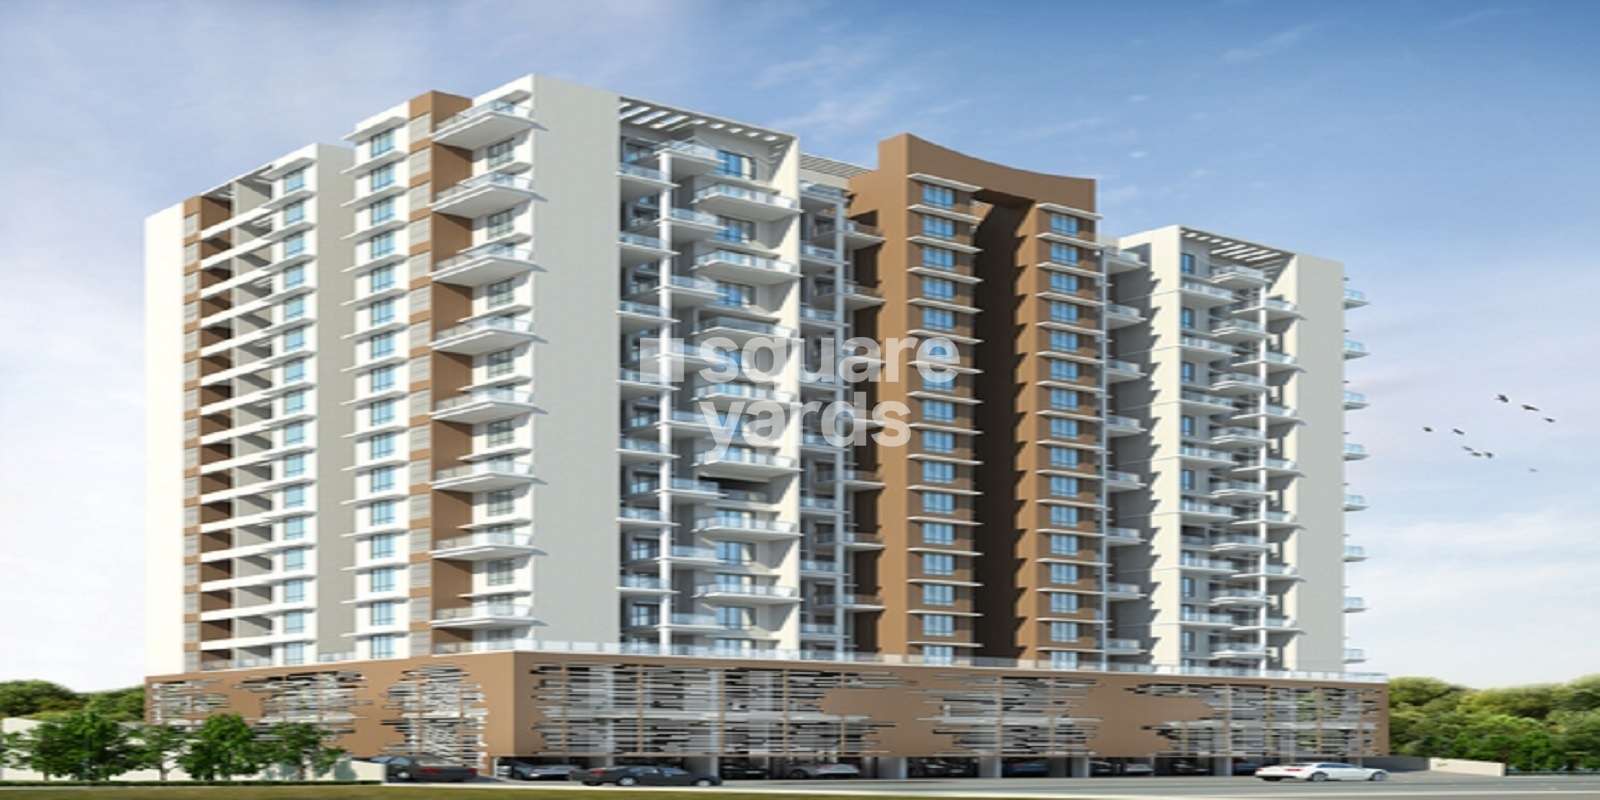 Amit Ved Vihar Phase 2 Cover Image